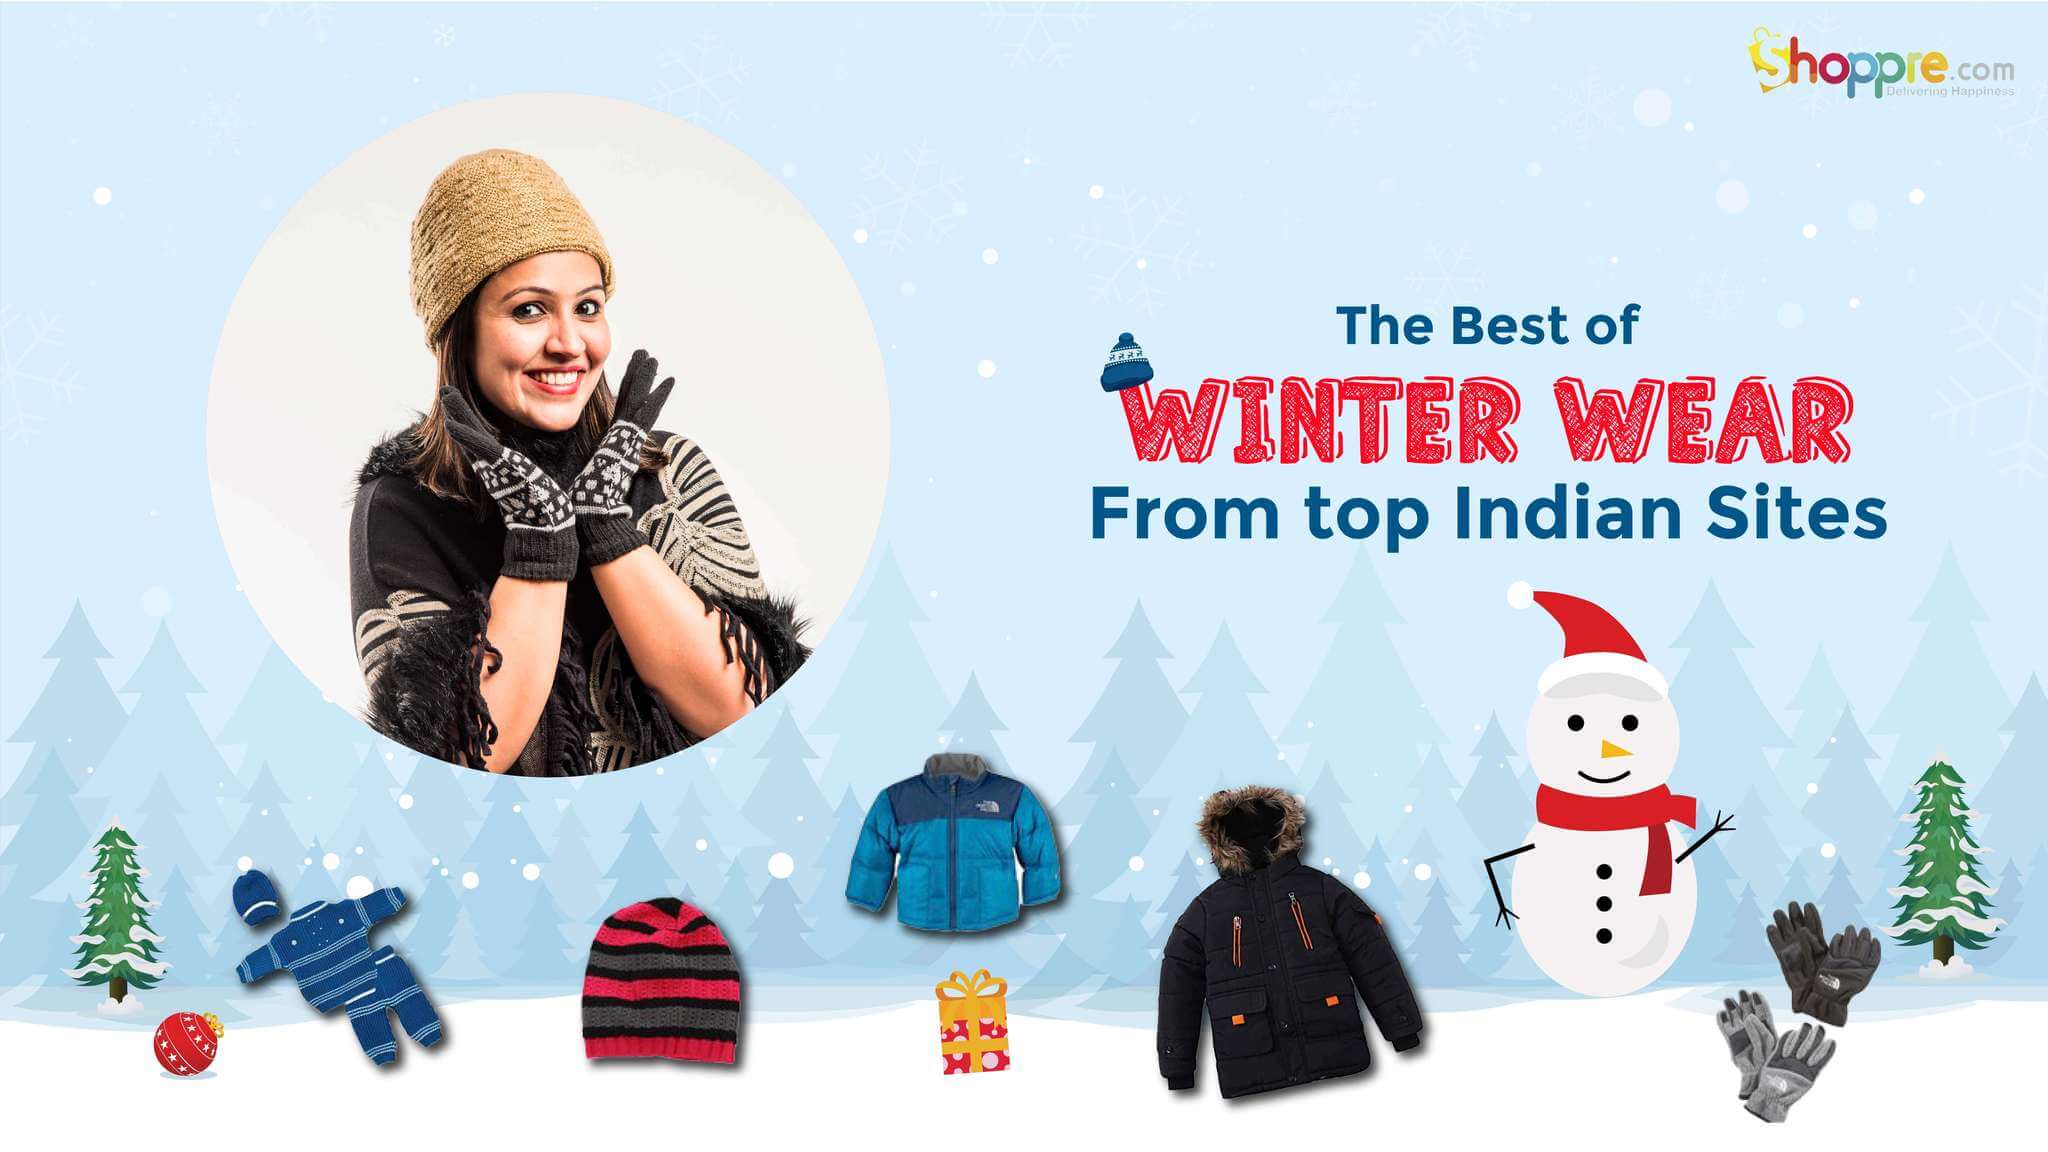 Best of Winter Wear From top Indian Sites